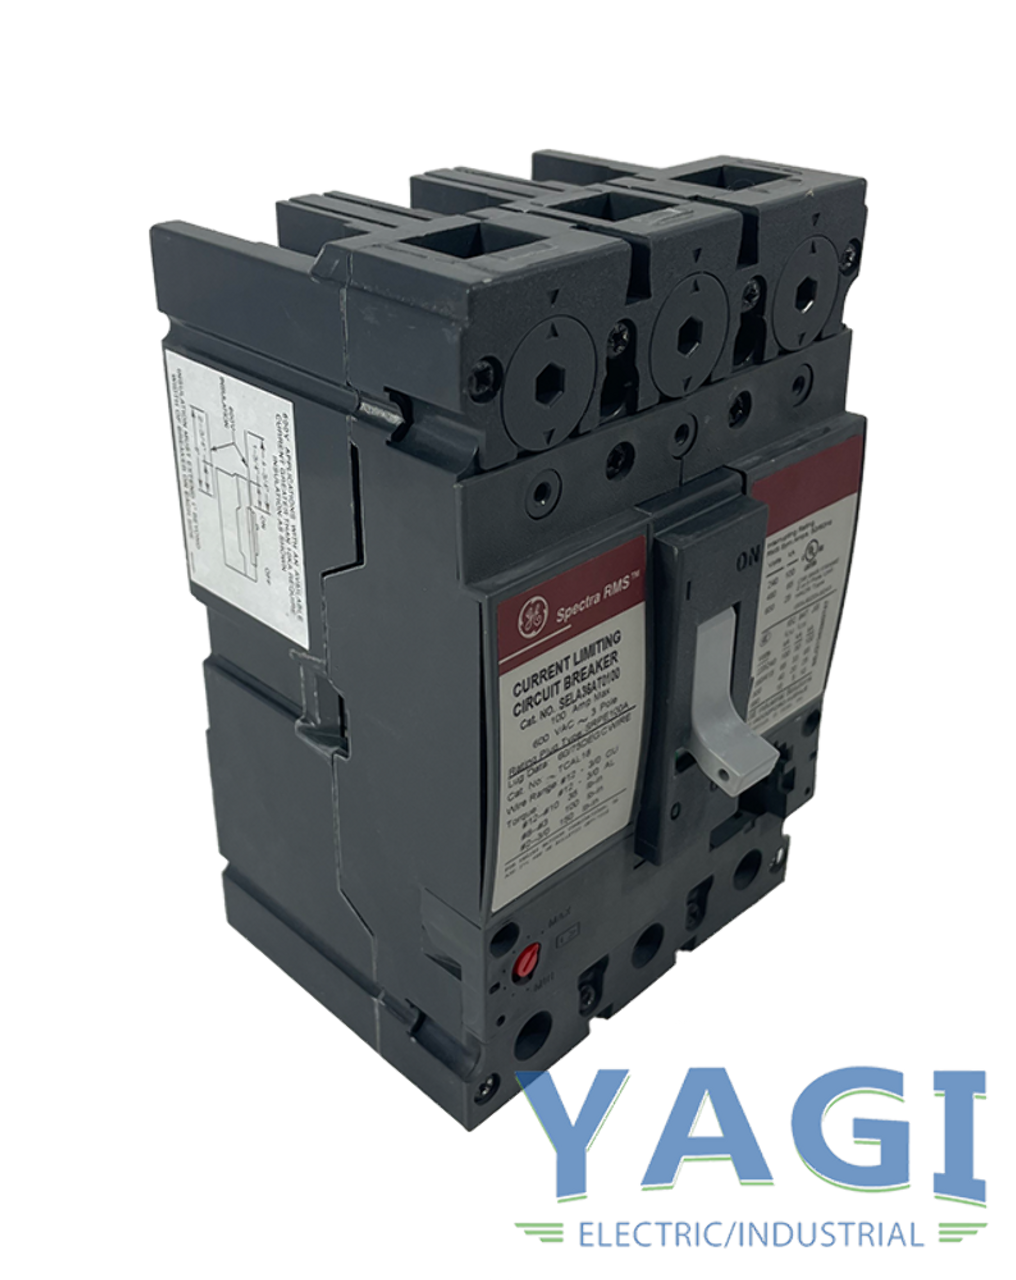 General Electric SELA36AT0100 Breaker 100A 600V 3P 25kA Spectra RMS Current Limiting